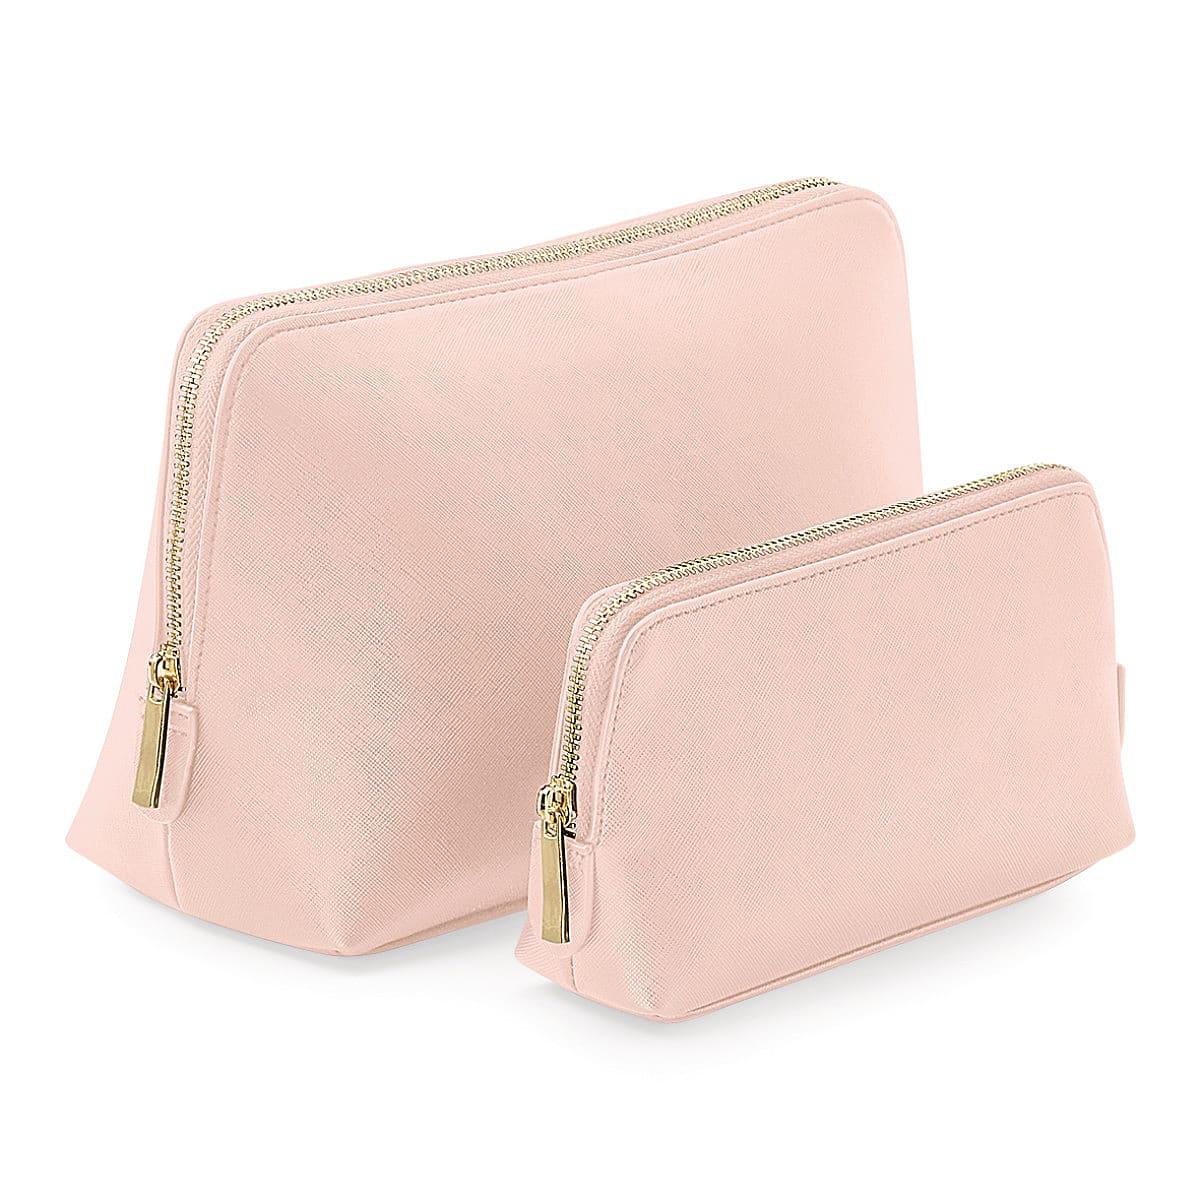 Bagbase Boutique Accessory Case in Soft Pink (Product Code: BG751)